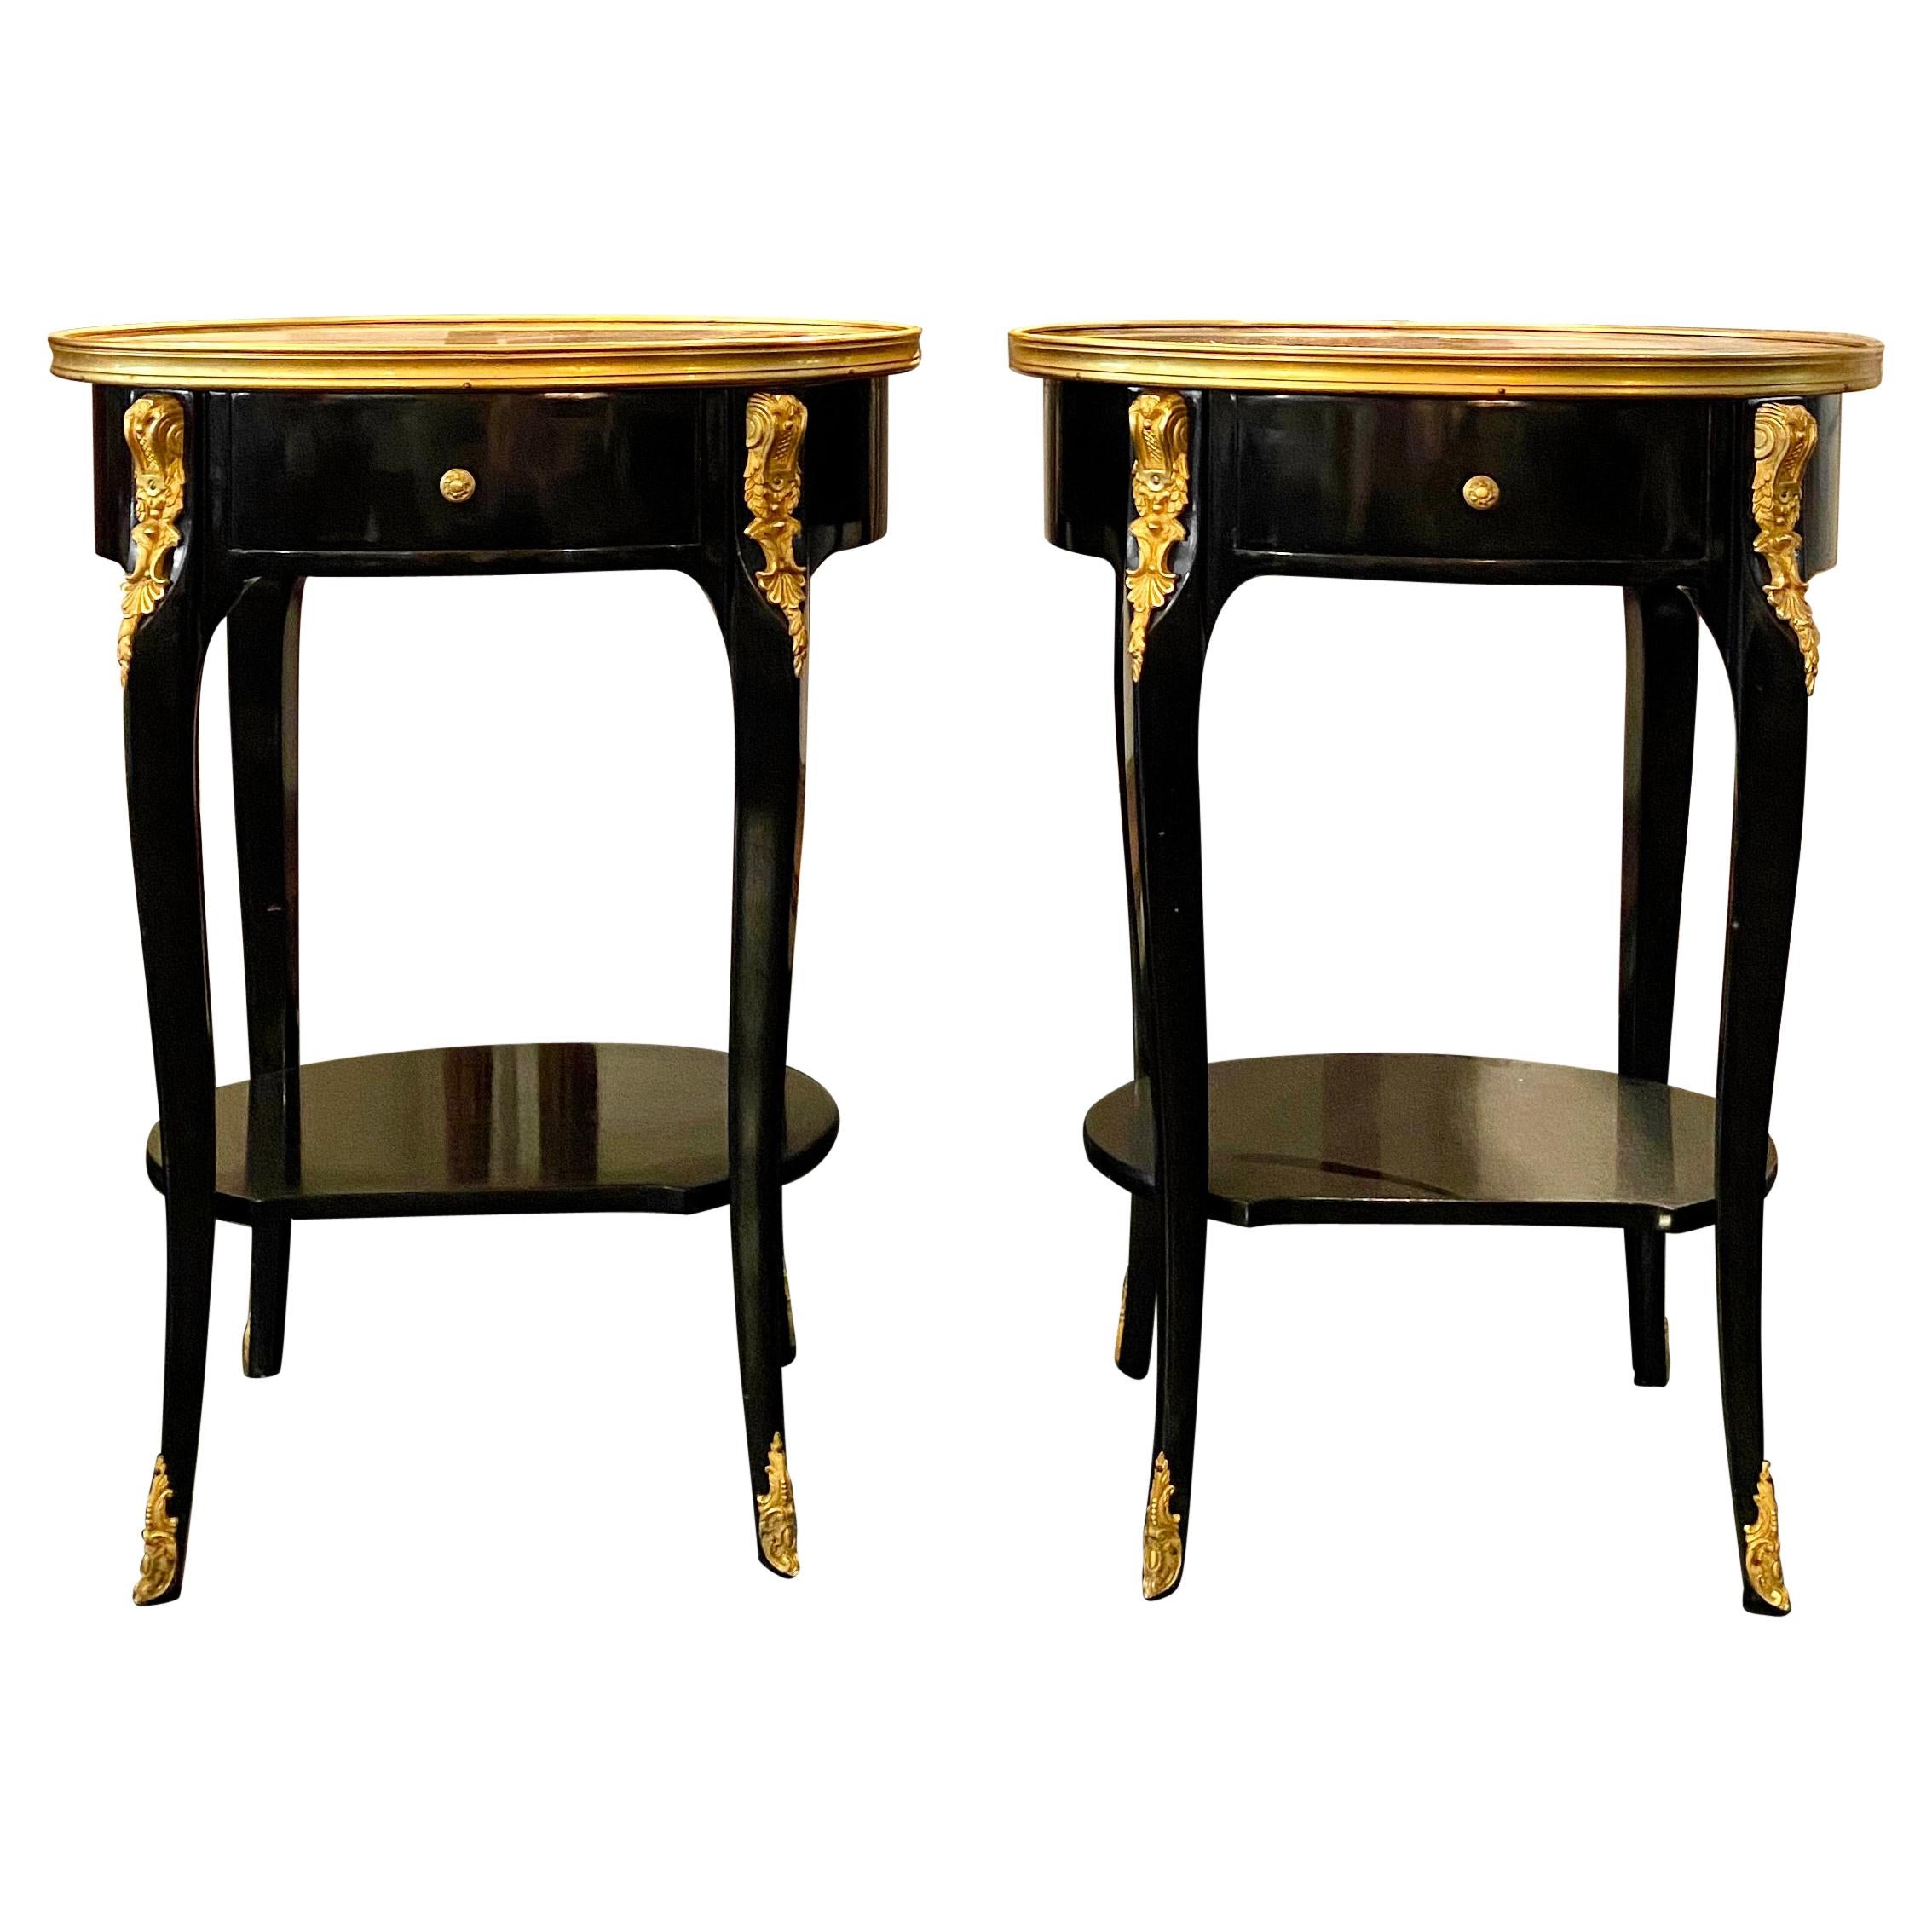 Pair of Louis XV Style Ebonized Side Tables with Marble Tops and Ormulu Mounts For Sale